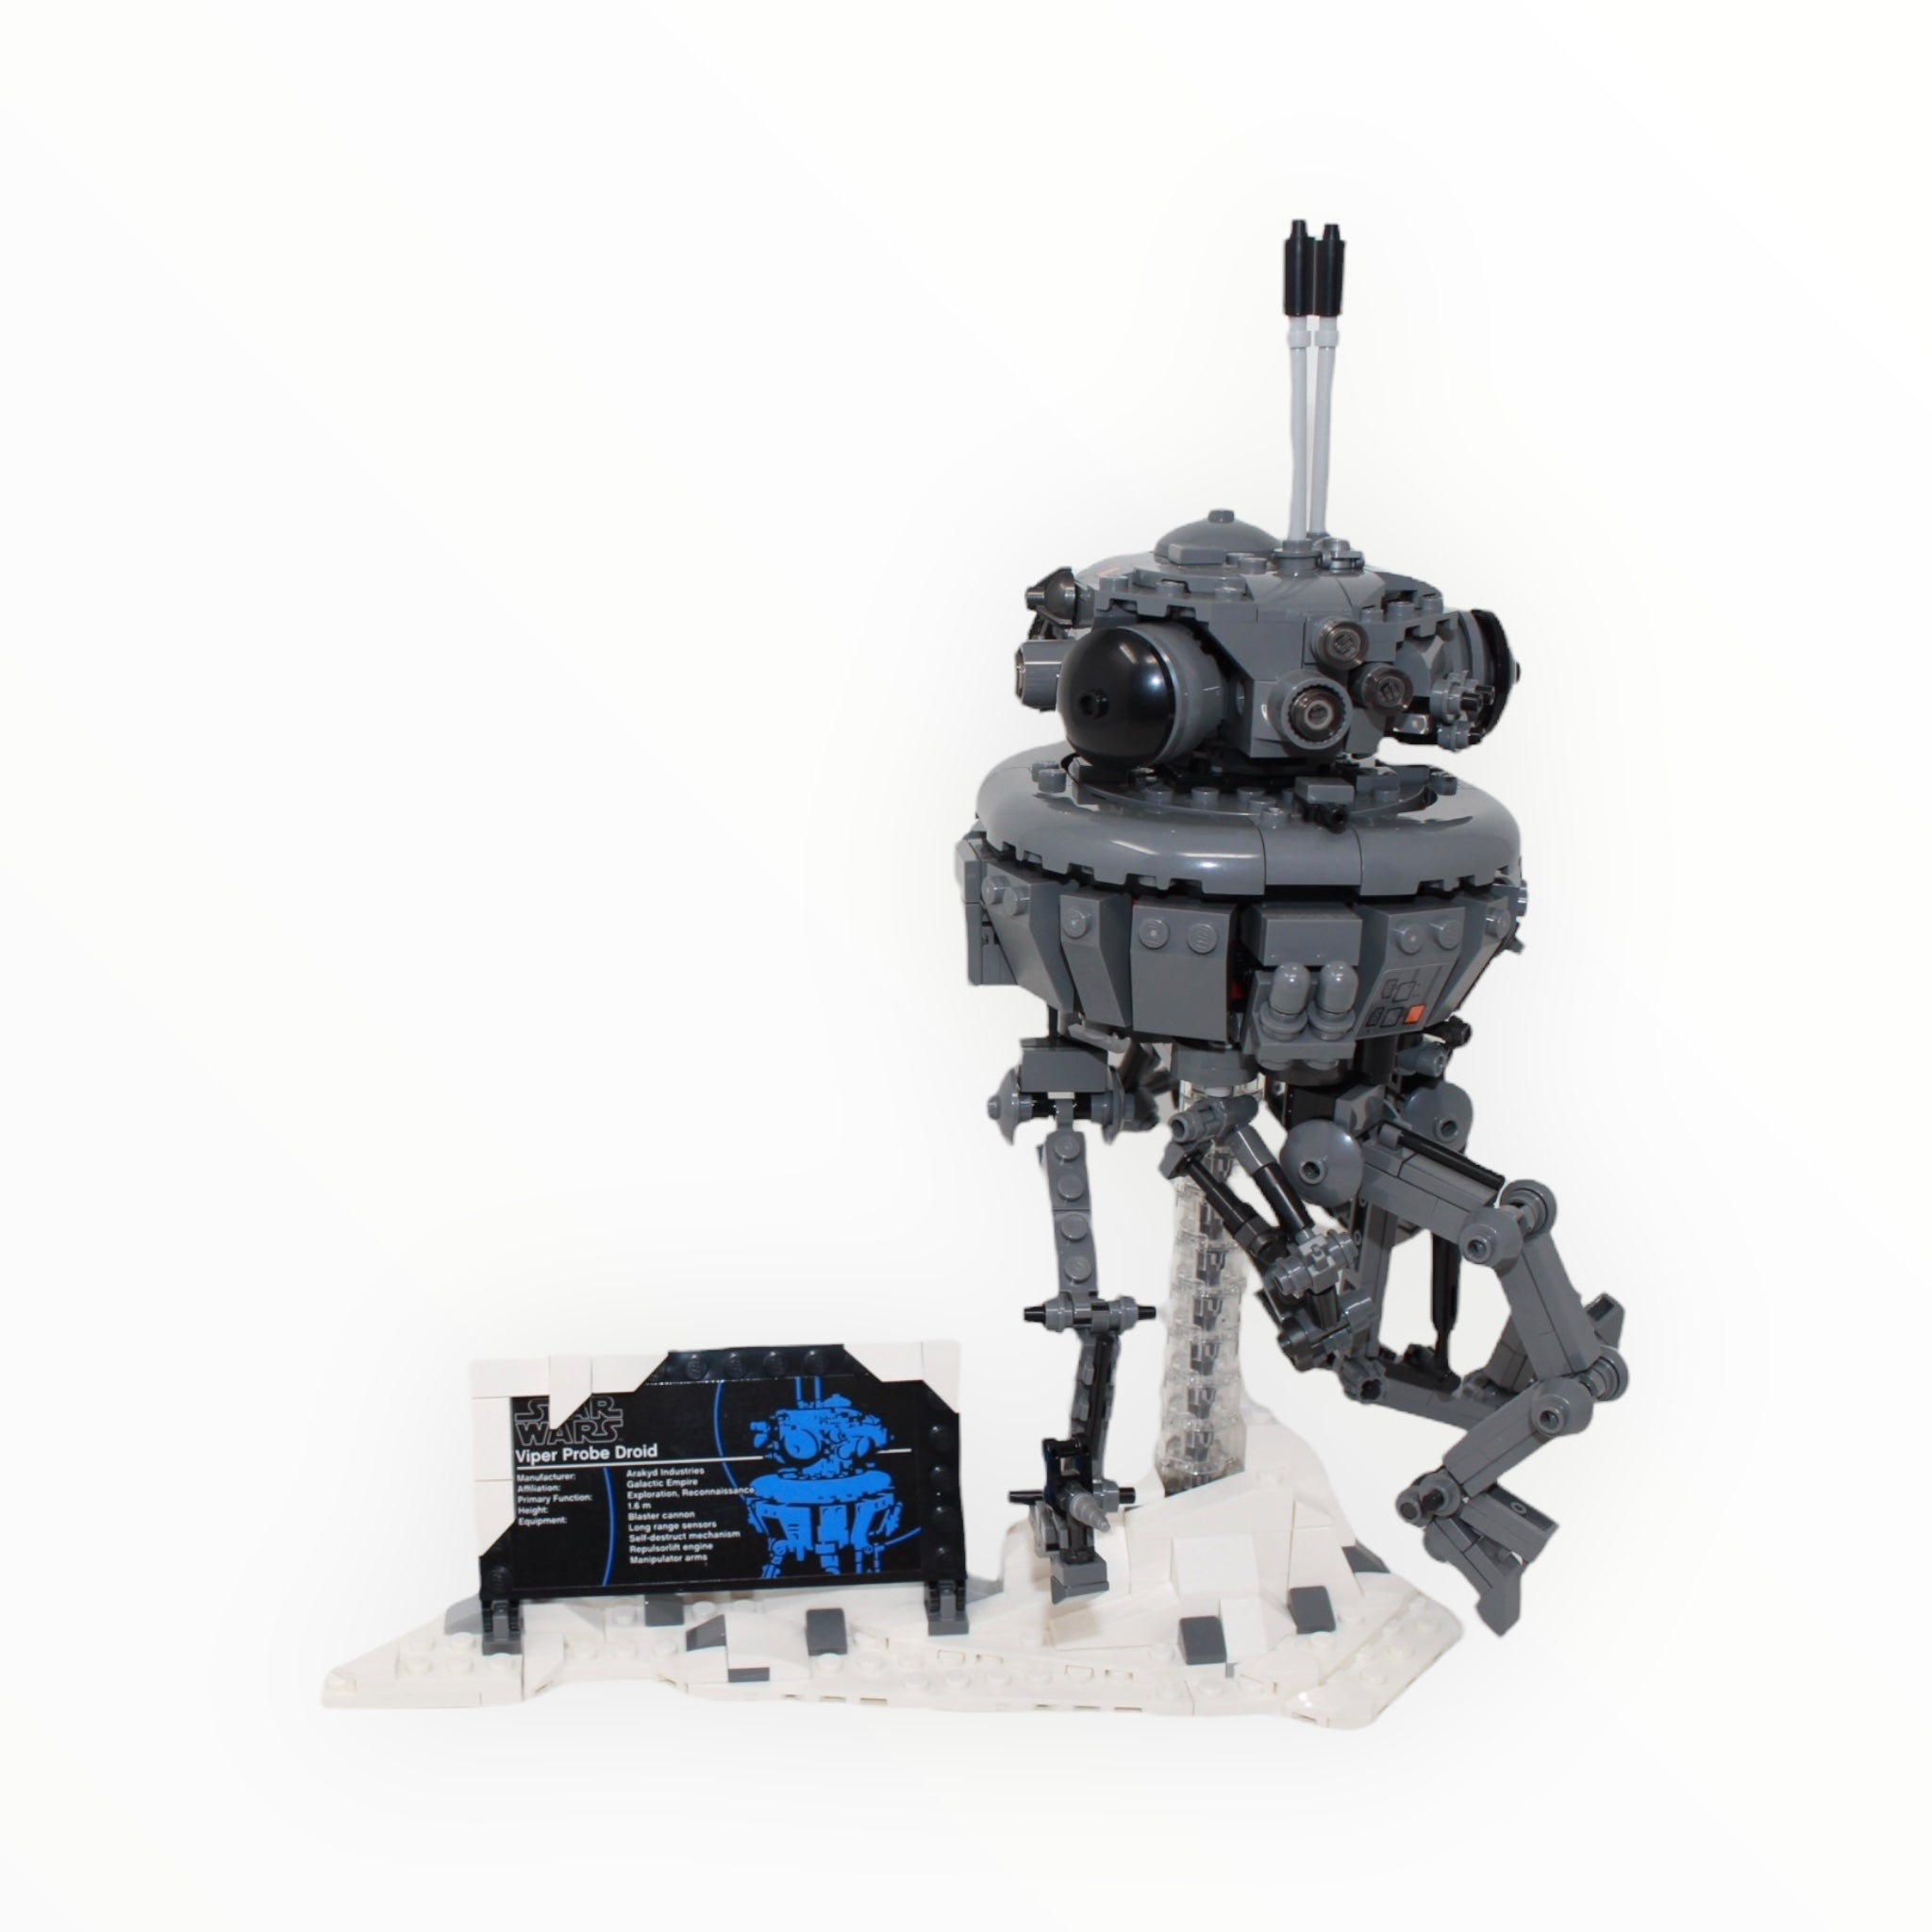 Used Set 75306 Star Wars Imperial Probe Droid